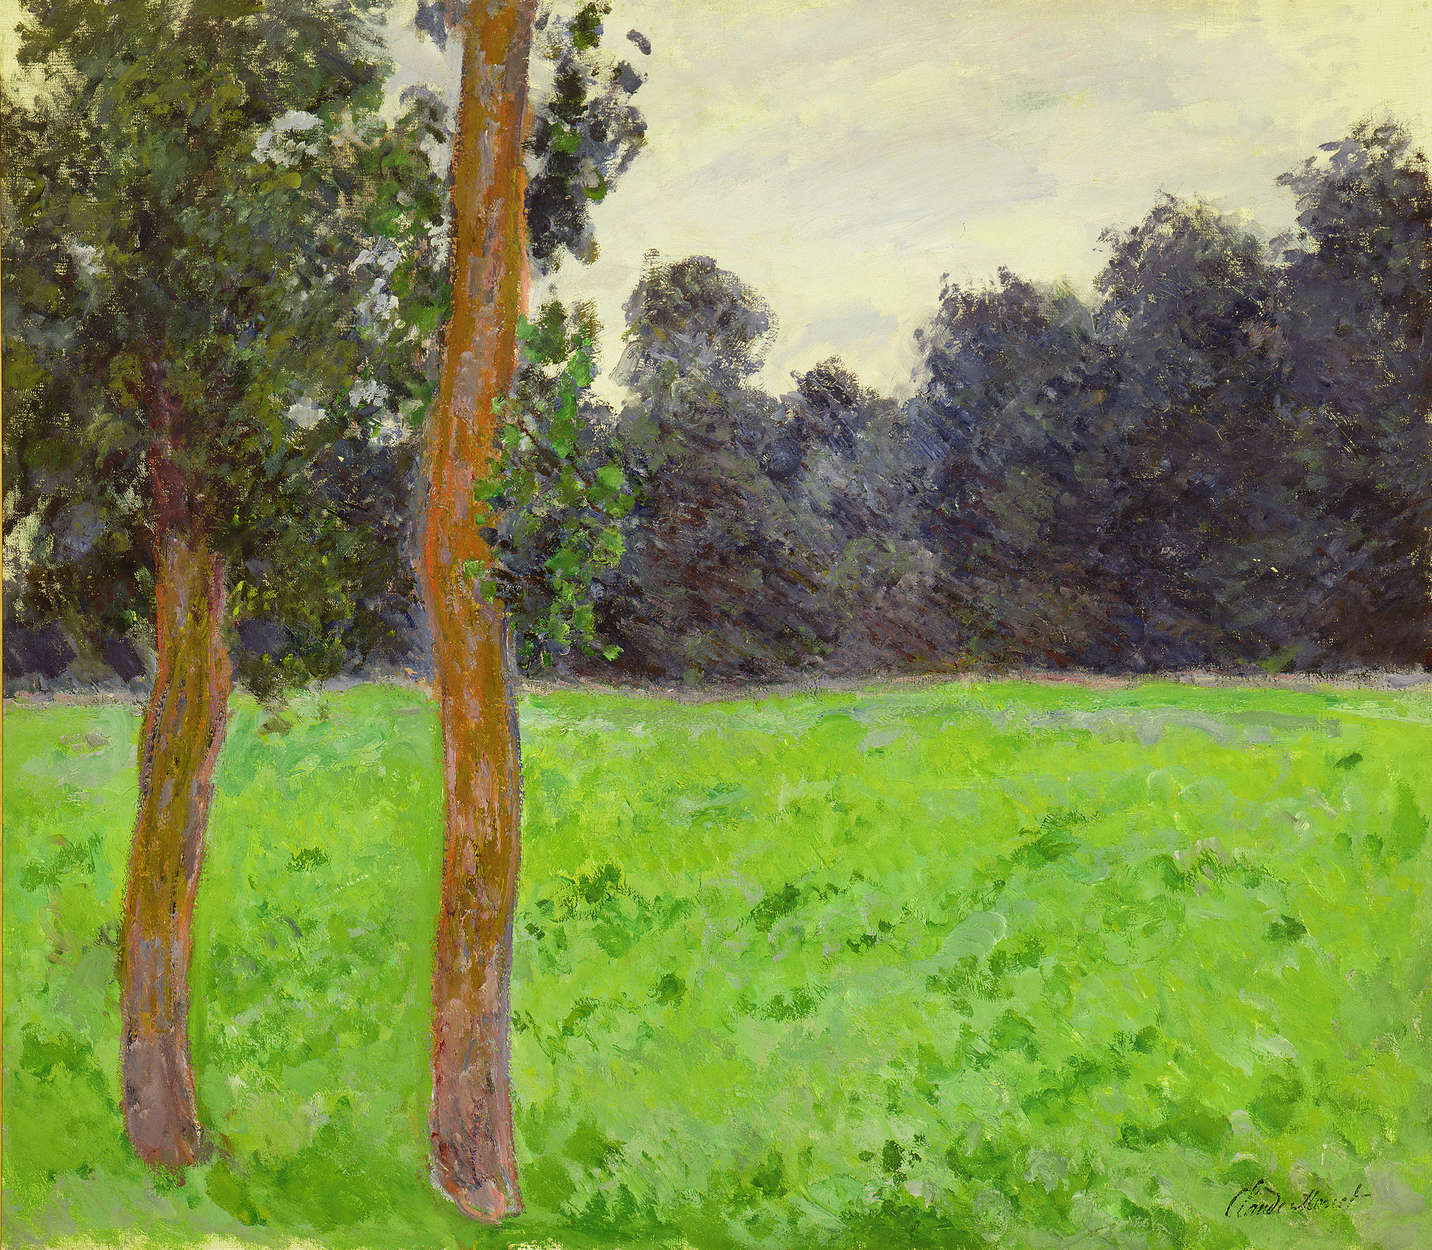             Photo wallpaper "Two trees in a meadow" by Claude Monet
        